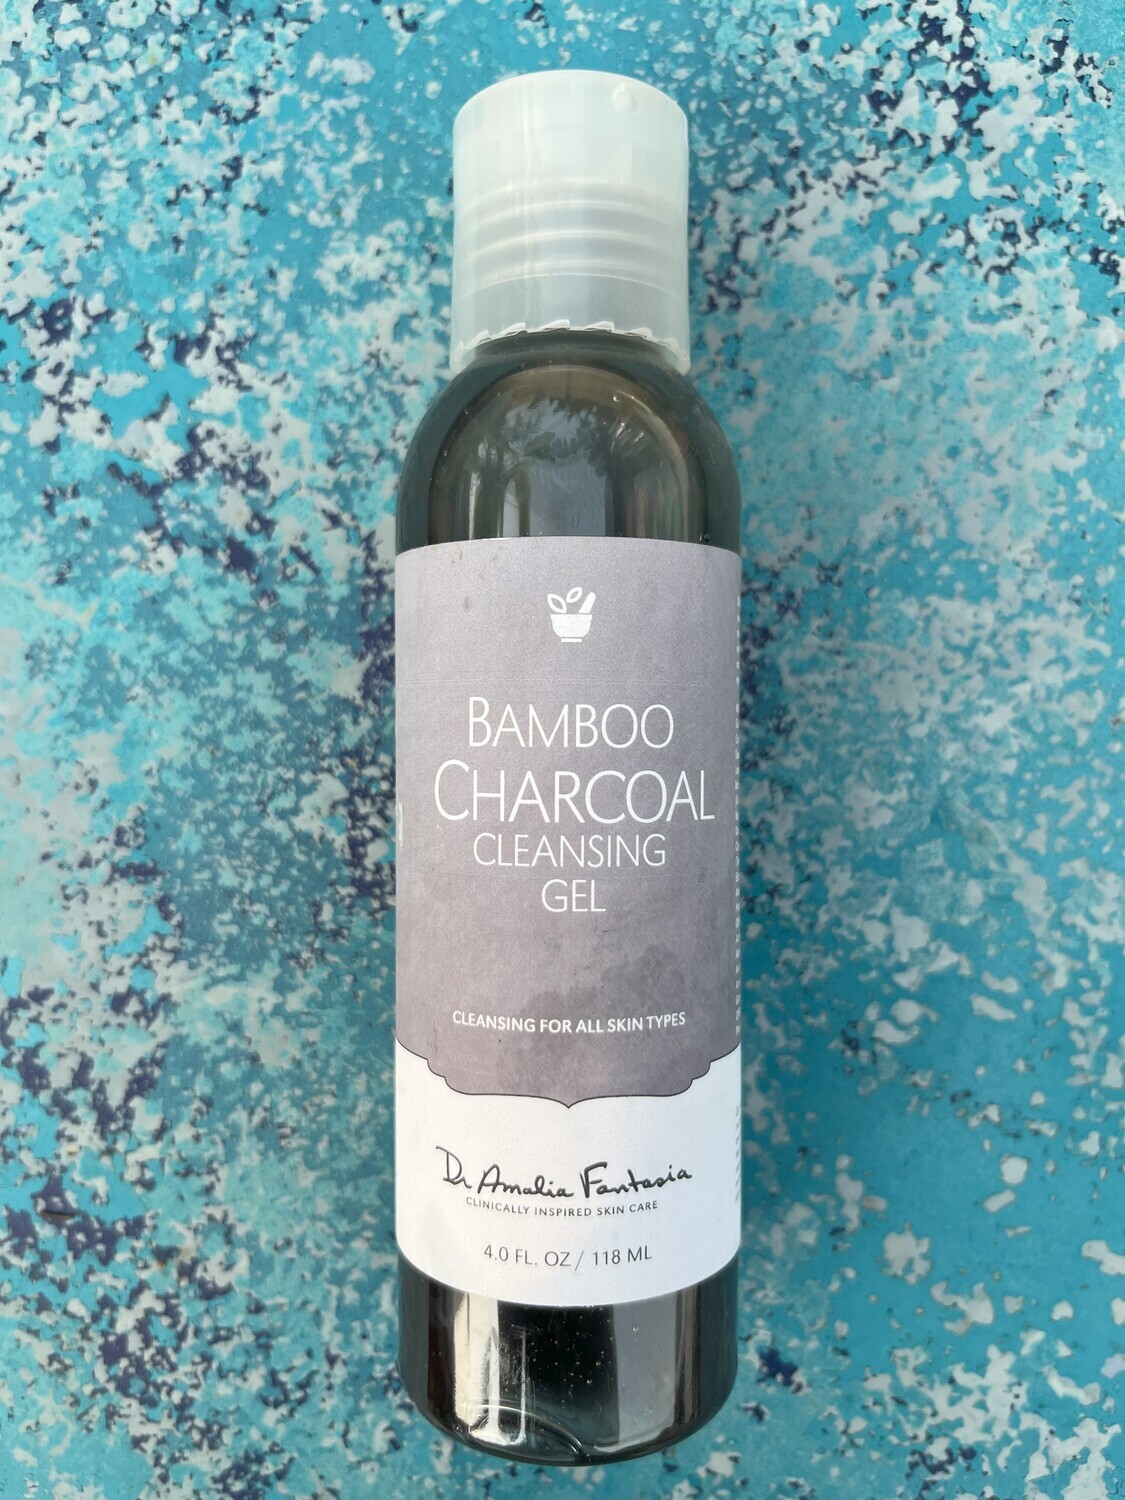 BAMBOO CHARCOAL CLEANSING GEL